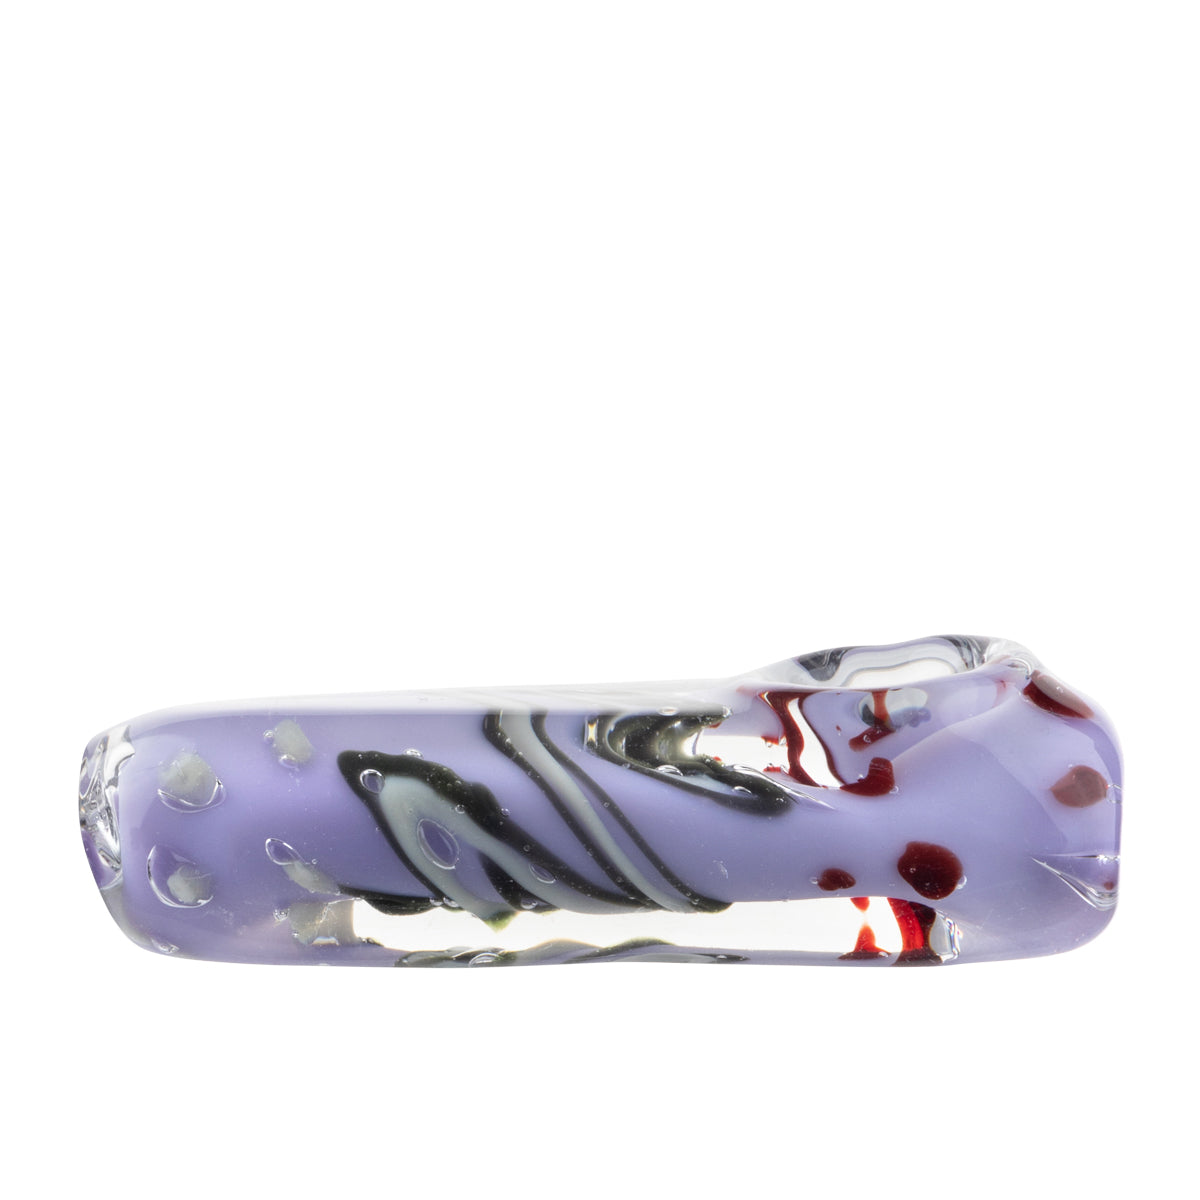 Hand Pipe | Brick Glass Hand Pipe Slyme Abstract Design | 3" - Glass - 3 Count Glass Hand Pipe Biohazard Inc   